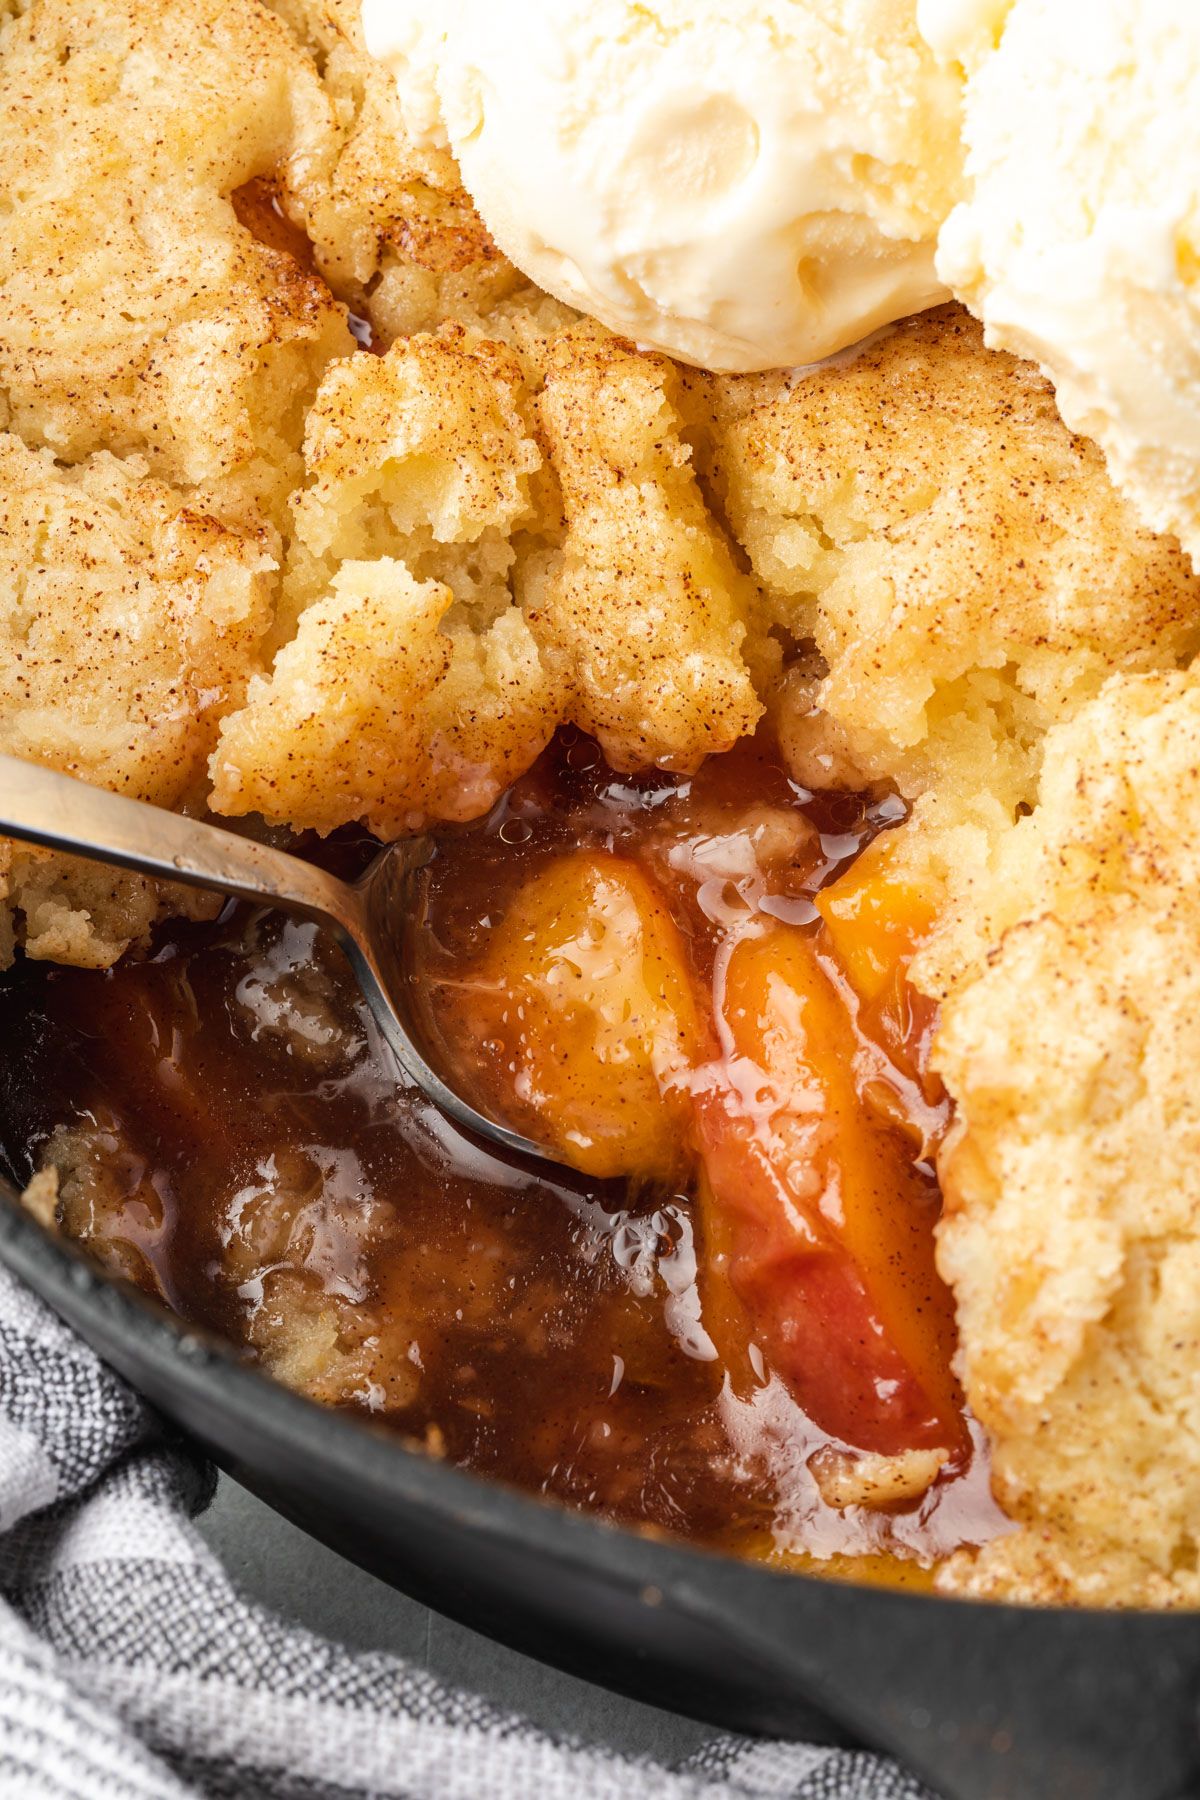 Close up of cobbler where a serving was scooped out, showing gooey peach filling.